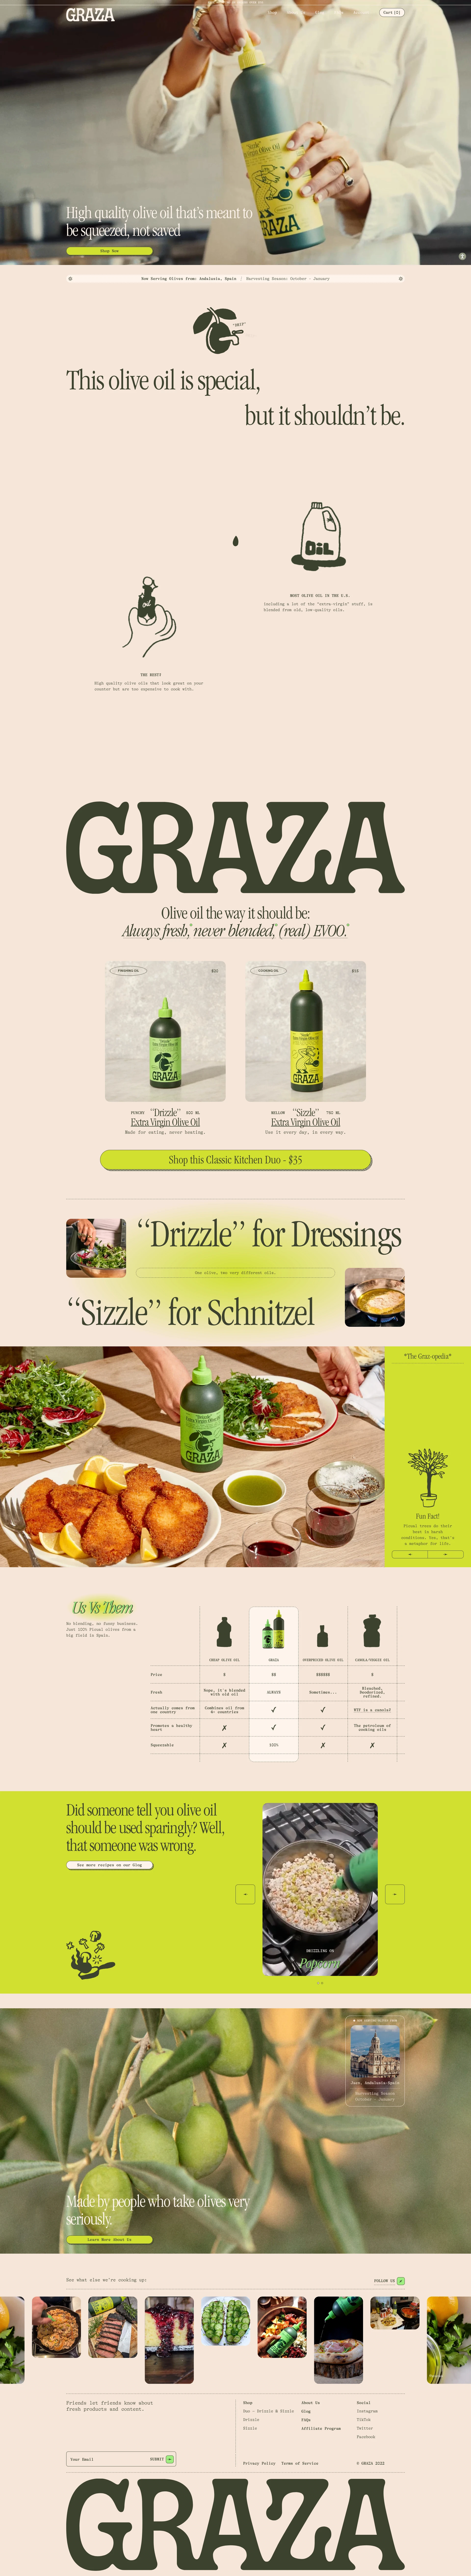 Graza Landing Page Example: High quality olive oil that’s meant to be squeezed, not saved.